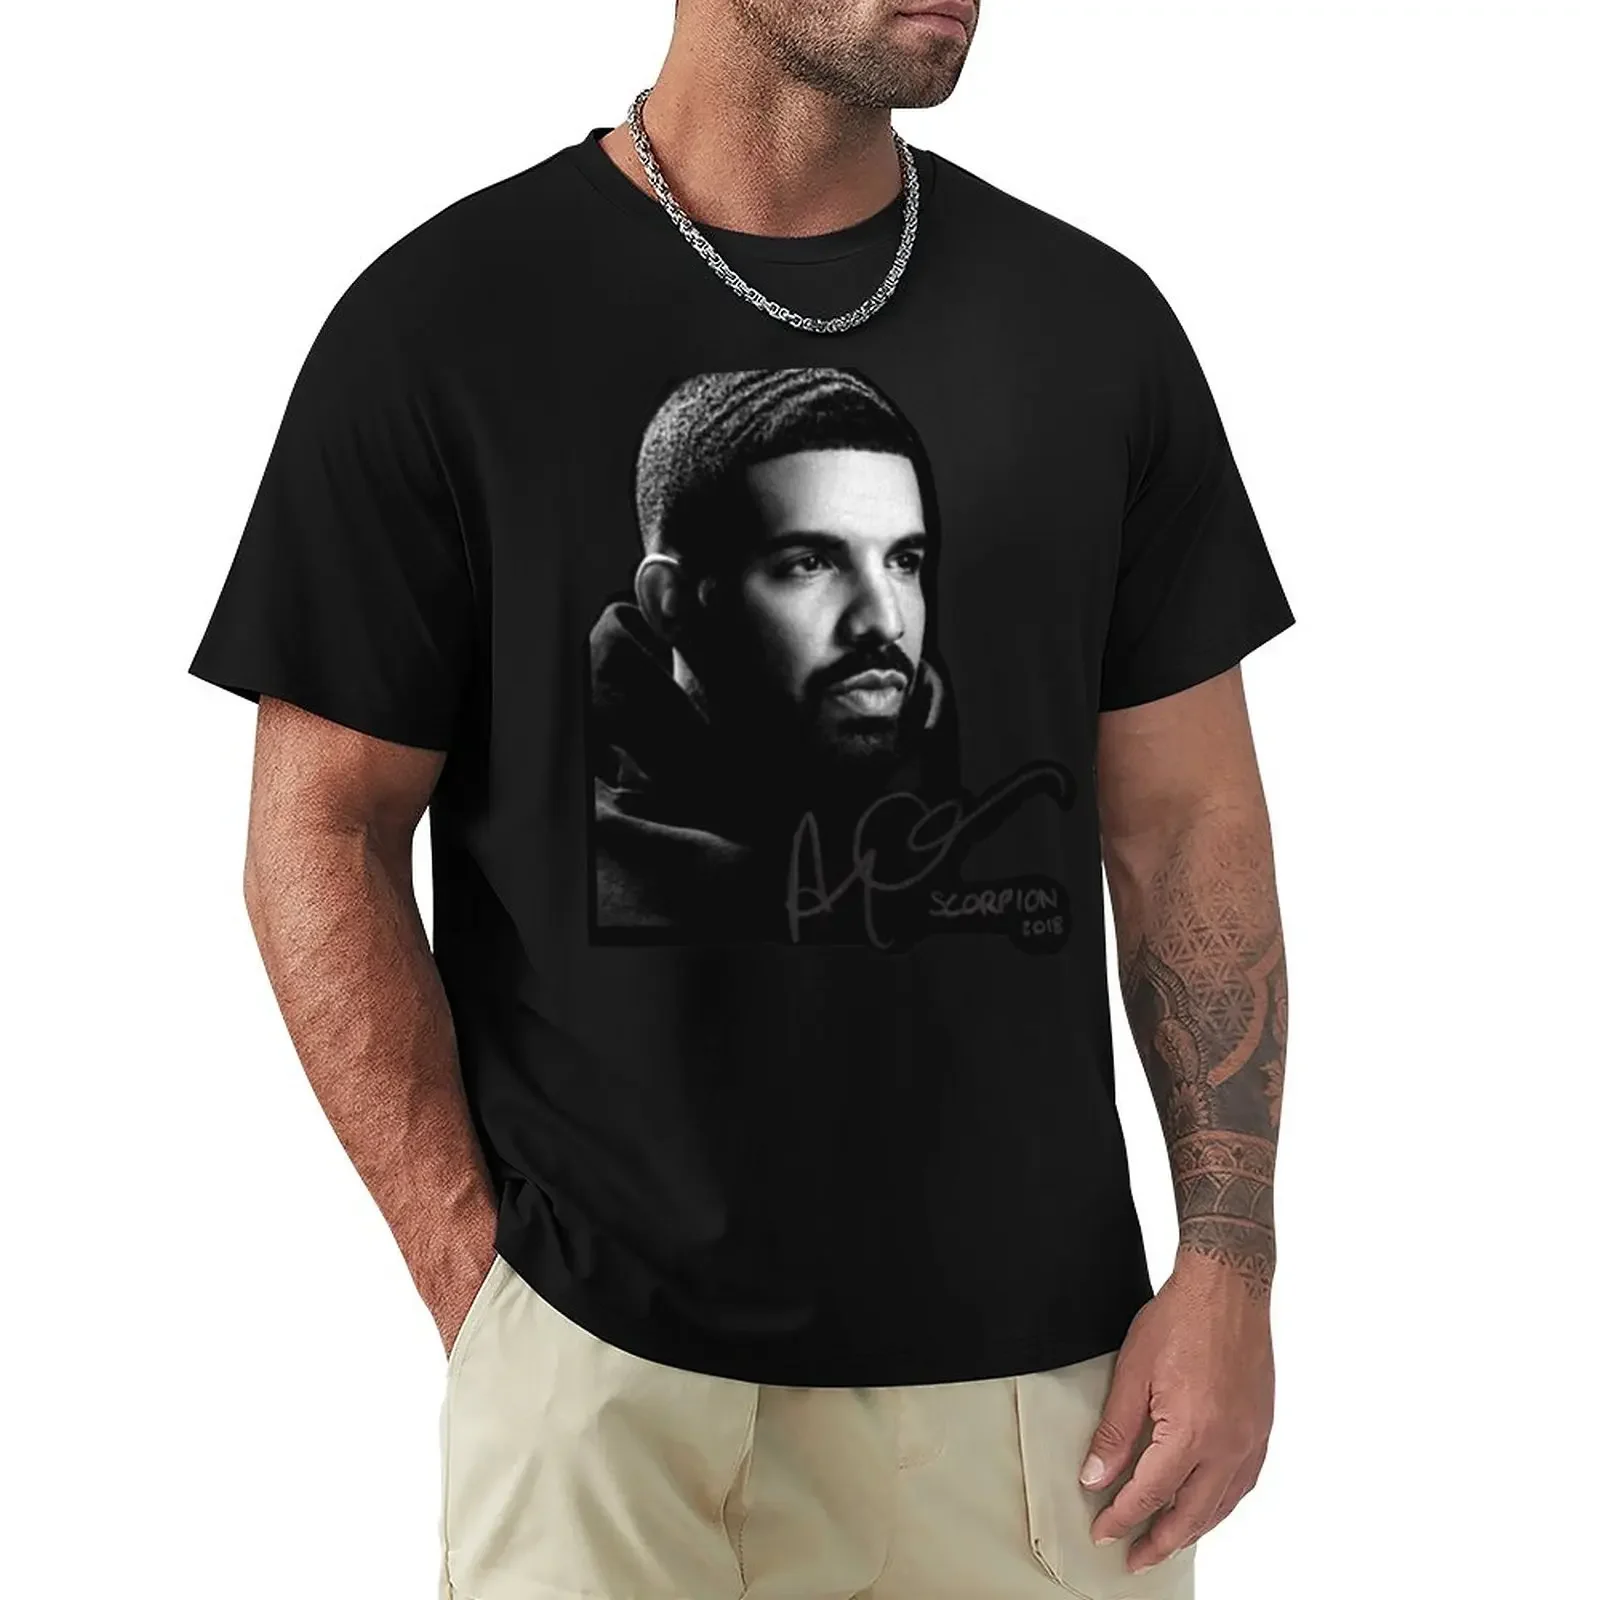 

Drake Scorpion T-Shirt kawaii clothes cute clothes oversized t shirts for men